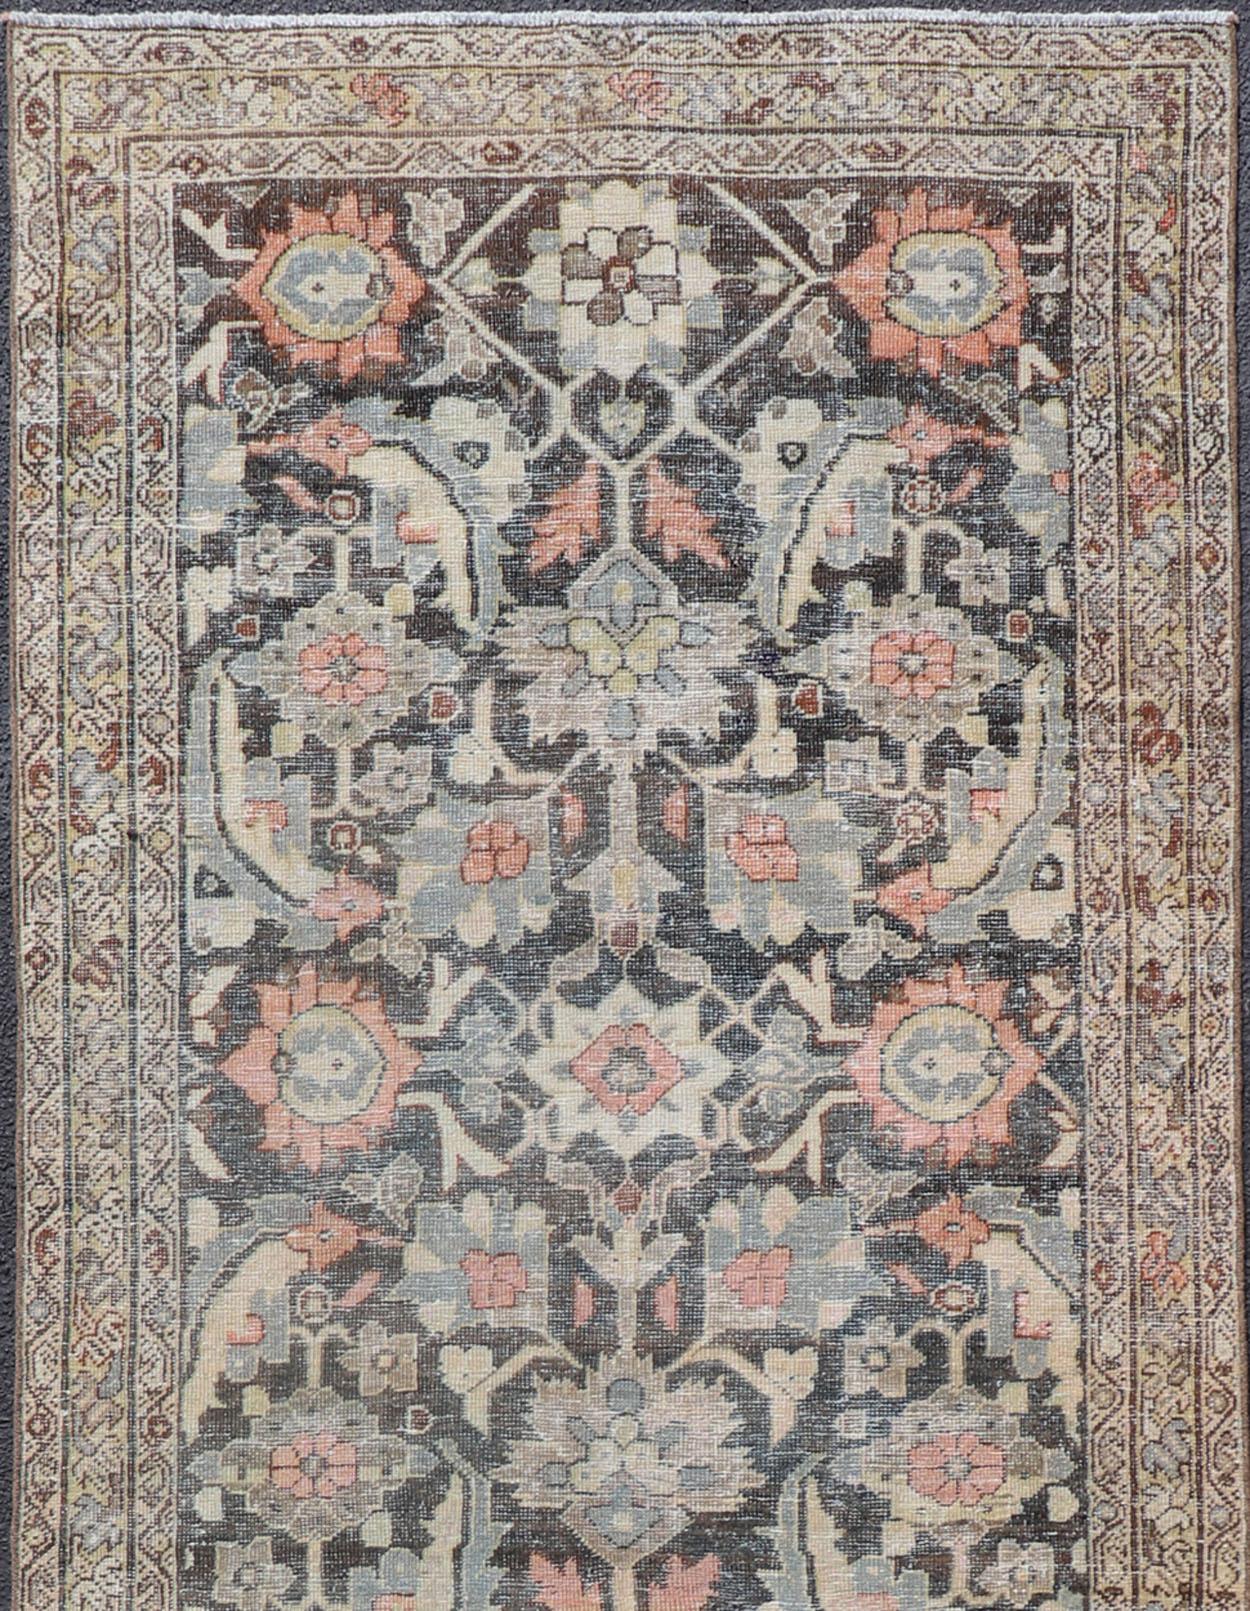 Blossoming all over large scale Herati design antique Persian Sultanabad runner in brown, charcoal and D. gray field, Keivan Woven Arts/rug SUS-2012-927, country of origin / type: Iran / Sultanabad, circa 1920

Measures: 4'2 x 12'9

This